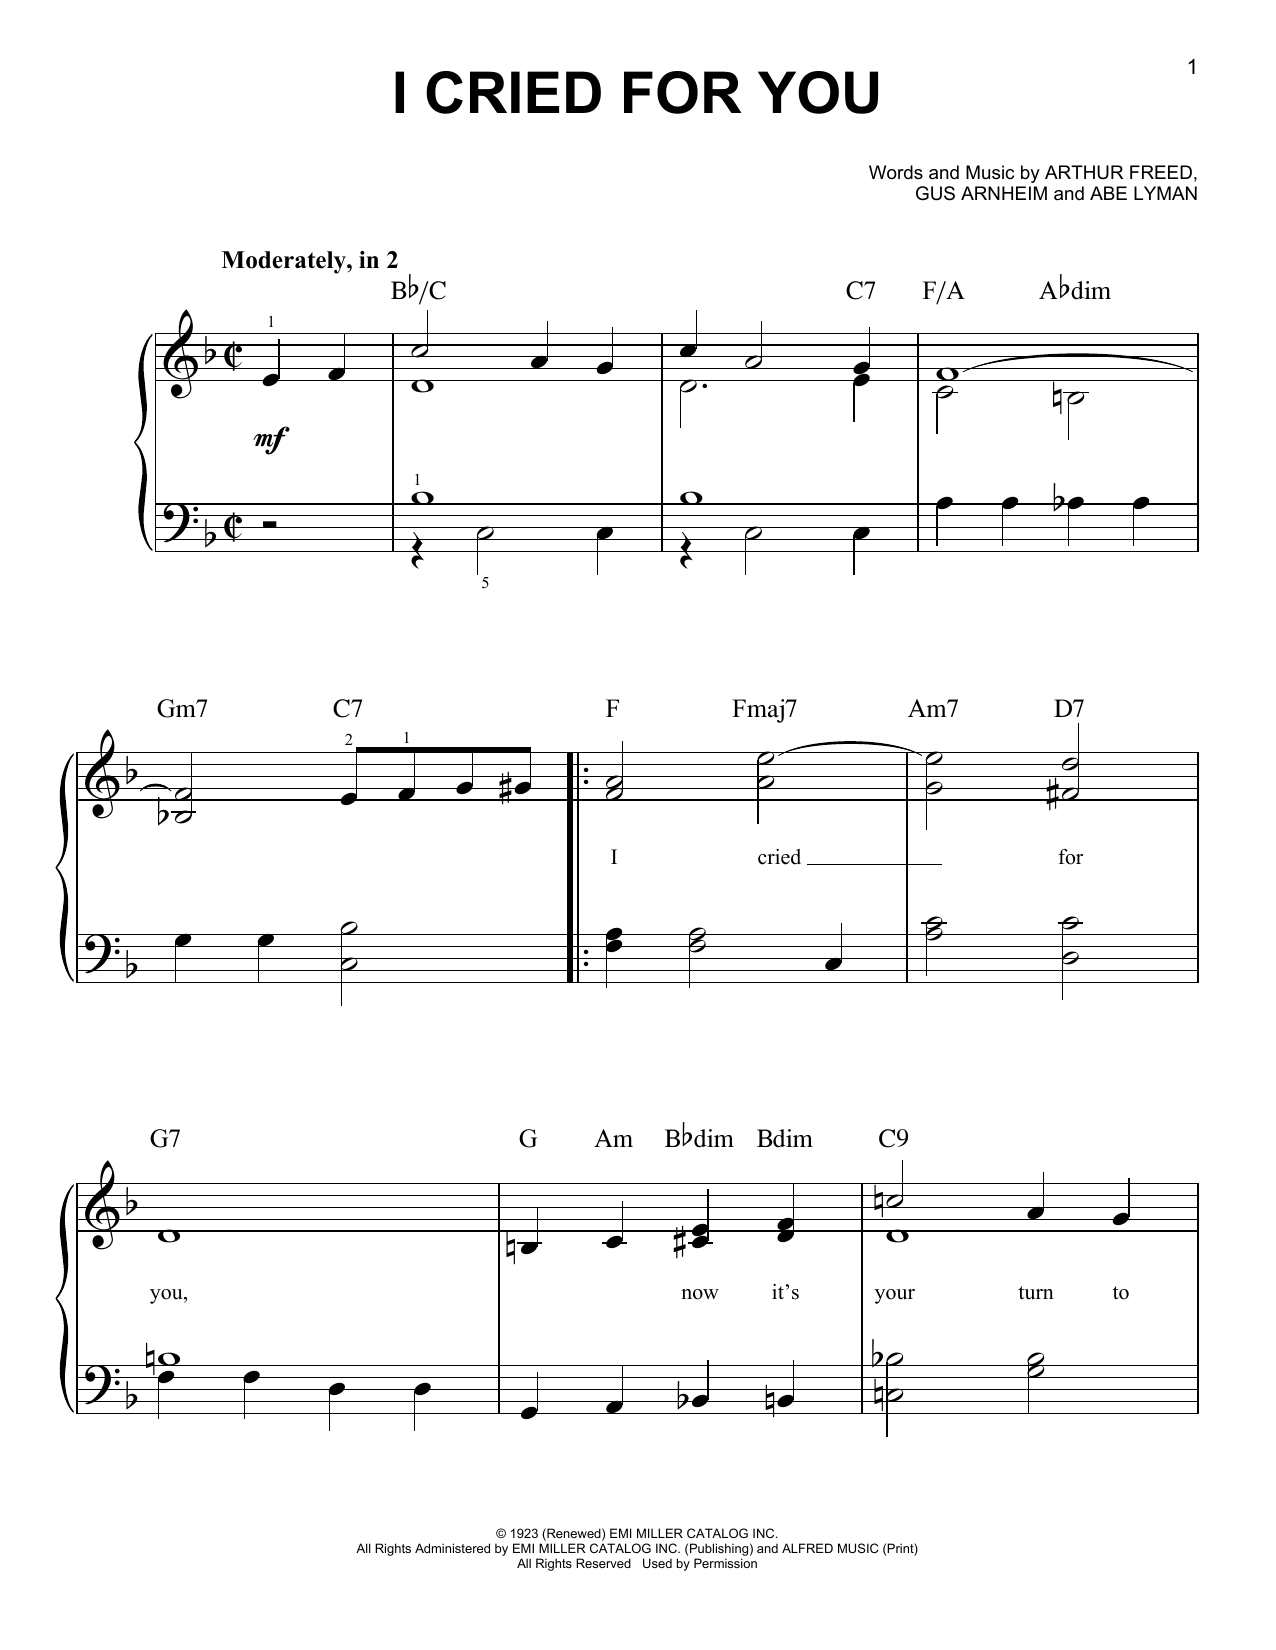 Abe Lyman I Cried For You sheet music notes and chords. Download Printable PDF.